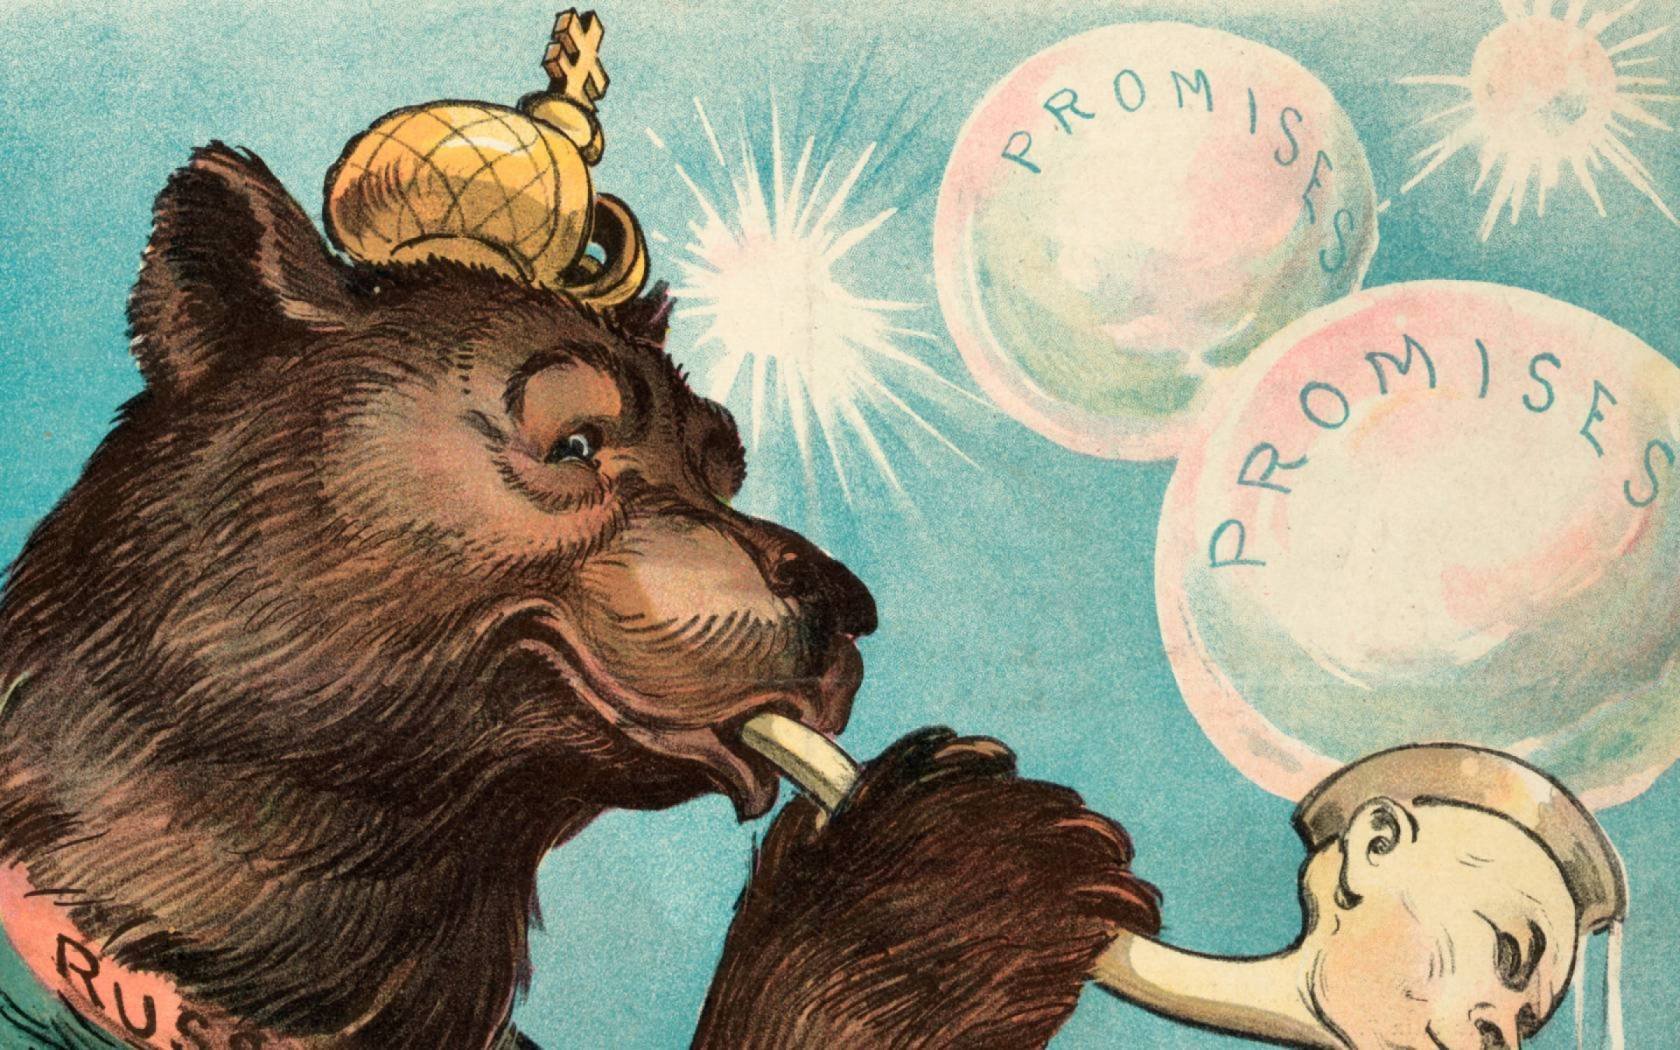 A political cartoon showing the Russian bear blowing soap bubbles labeled 'Promises' through a meerschaum pipe with a Chinese face, using liquid from a bowl labeled 'Manchurian soft soap'. The 1903 cartoon is one of many examples of the figure of the bear embodying Western preconceptions of Russia.